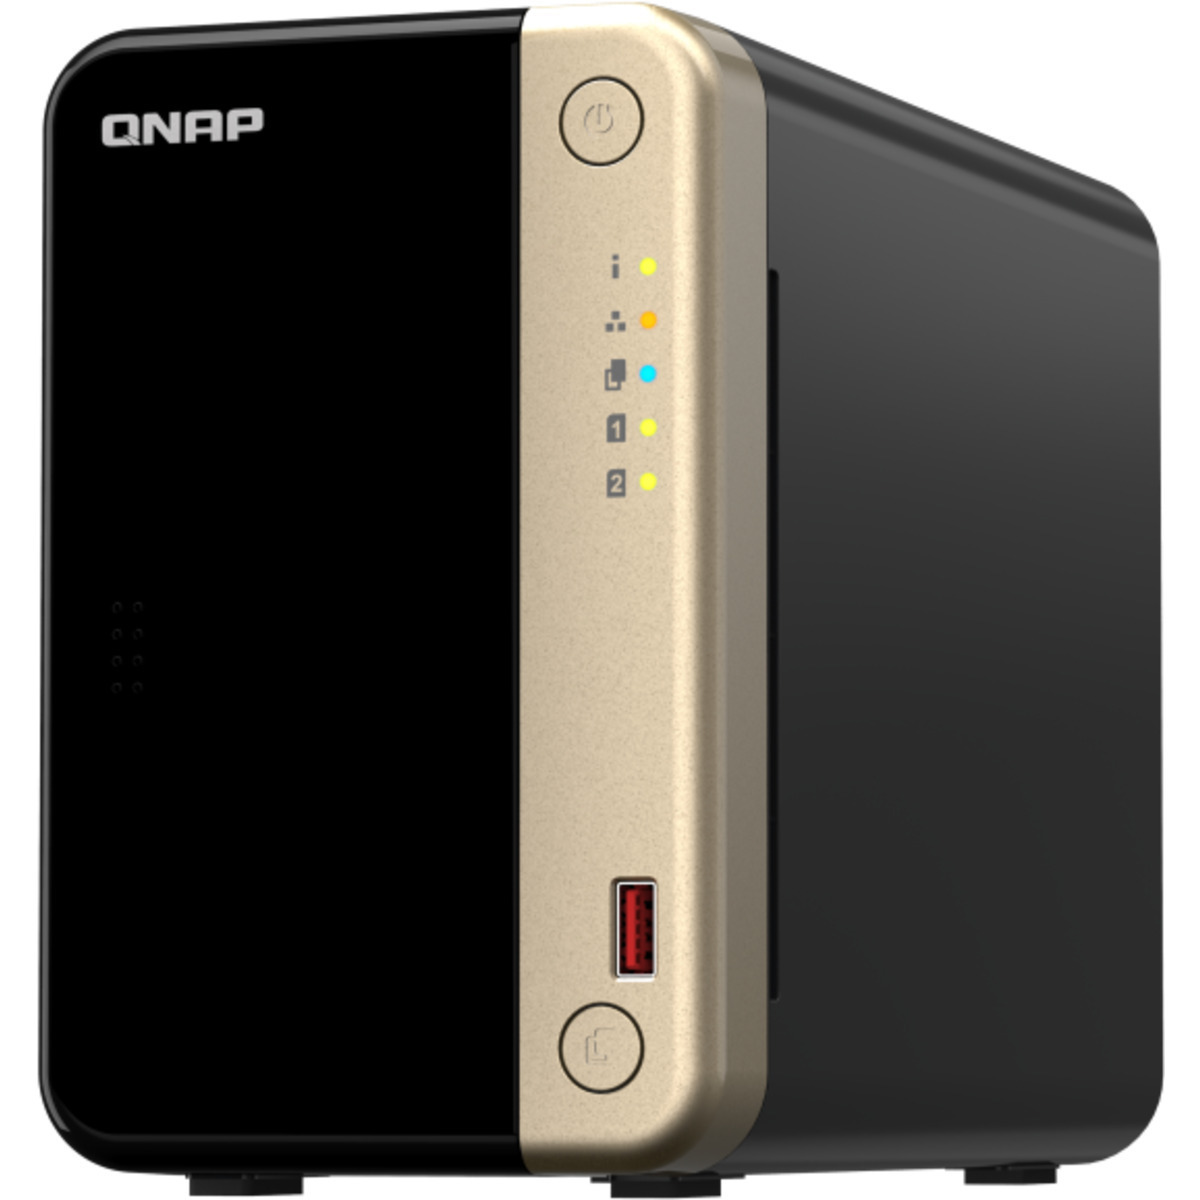 QNAP TS-264 4tb 2-Bay Desktop Multimedia / Power User / Business NAS - Network Attached Storage Device 1x4tb Western Digital Red Plus WD40EFPX 3.5 5400rpm SATA 6Gb/s HDD NAS Class Drives Installed - Burn-In Tested - ON SALE TS-264